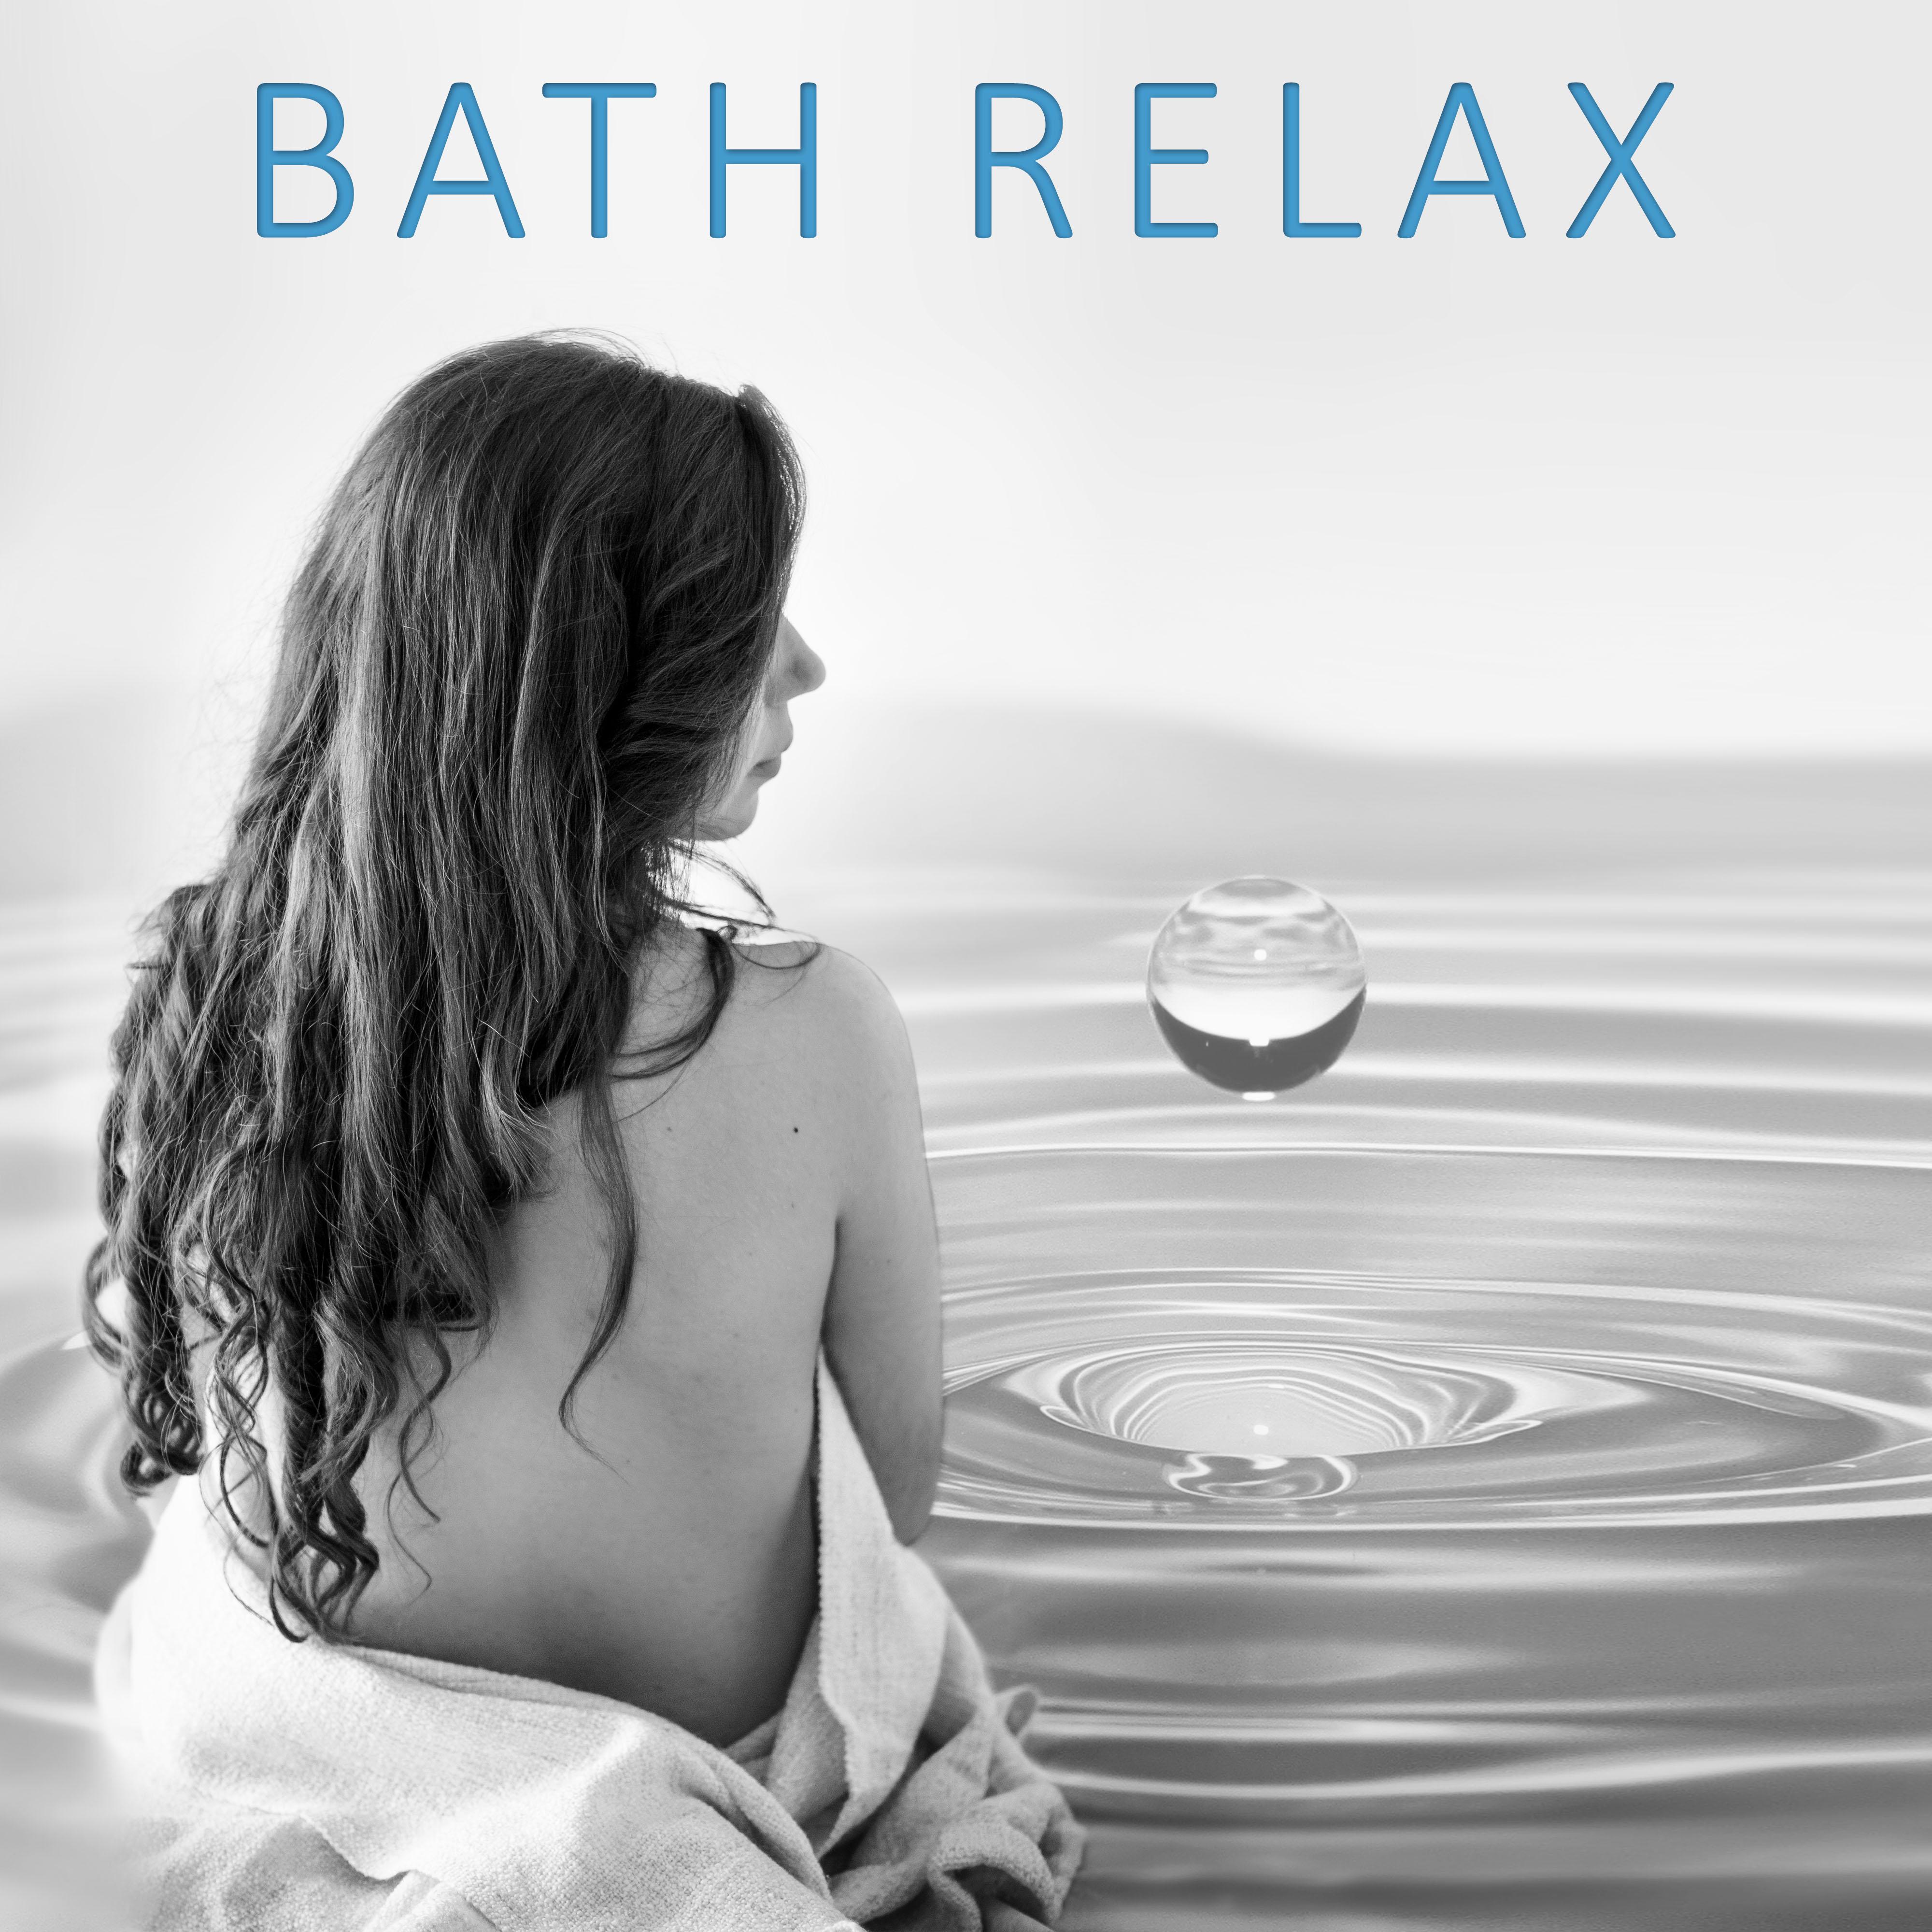 Bath Relax  – New Age Music for Spa, Bath Time, Sounds of Nature, Relaxation, Massage, Welllness and Sleep, Sound Therapy